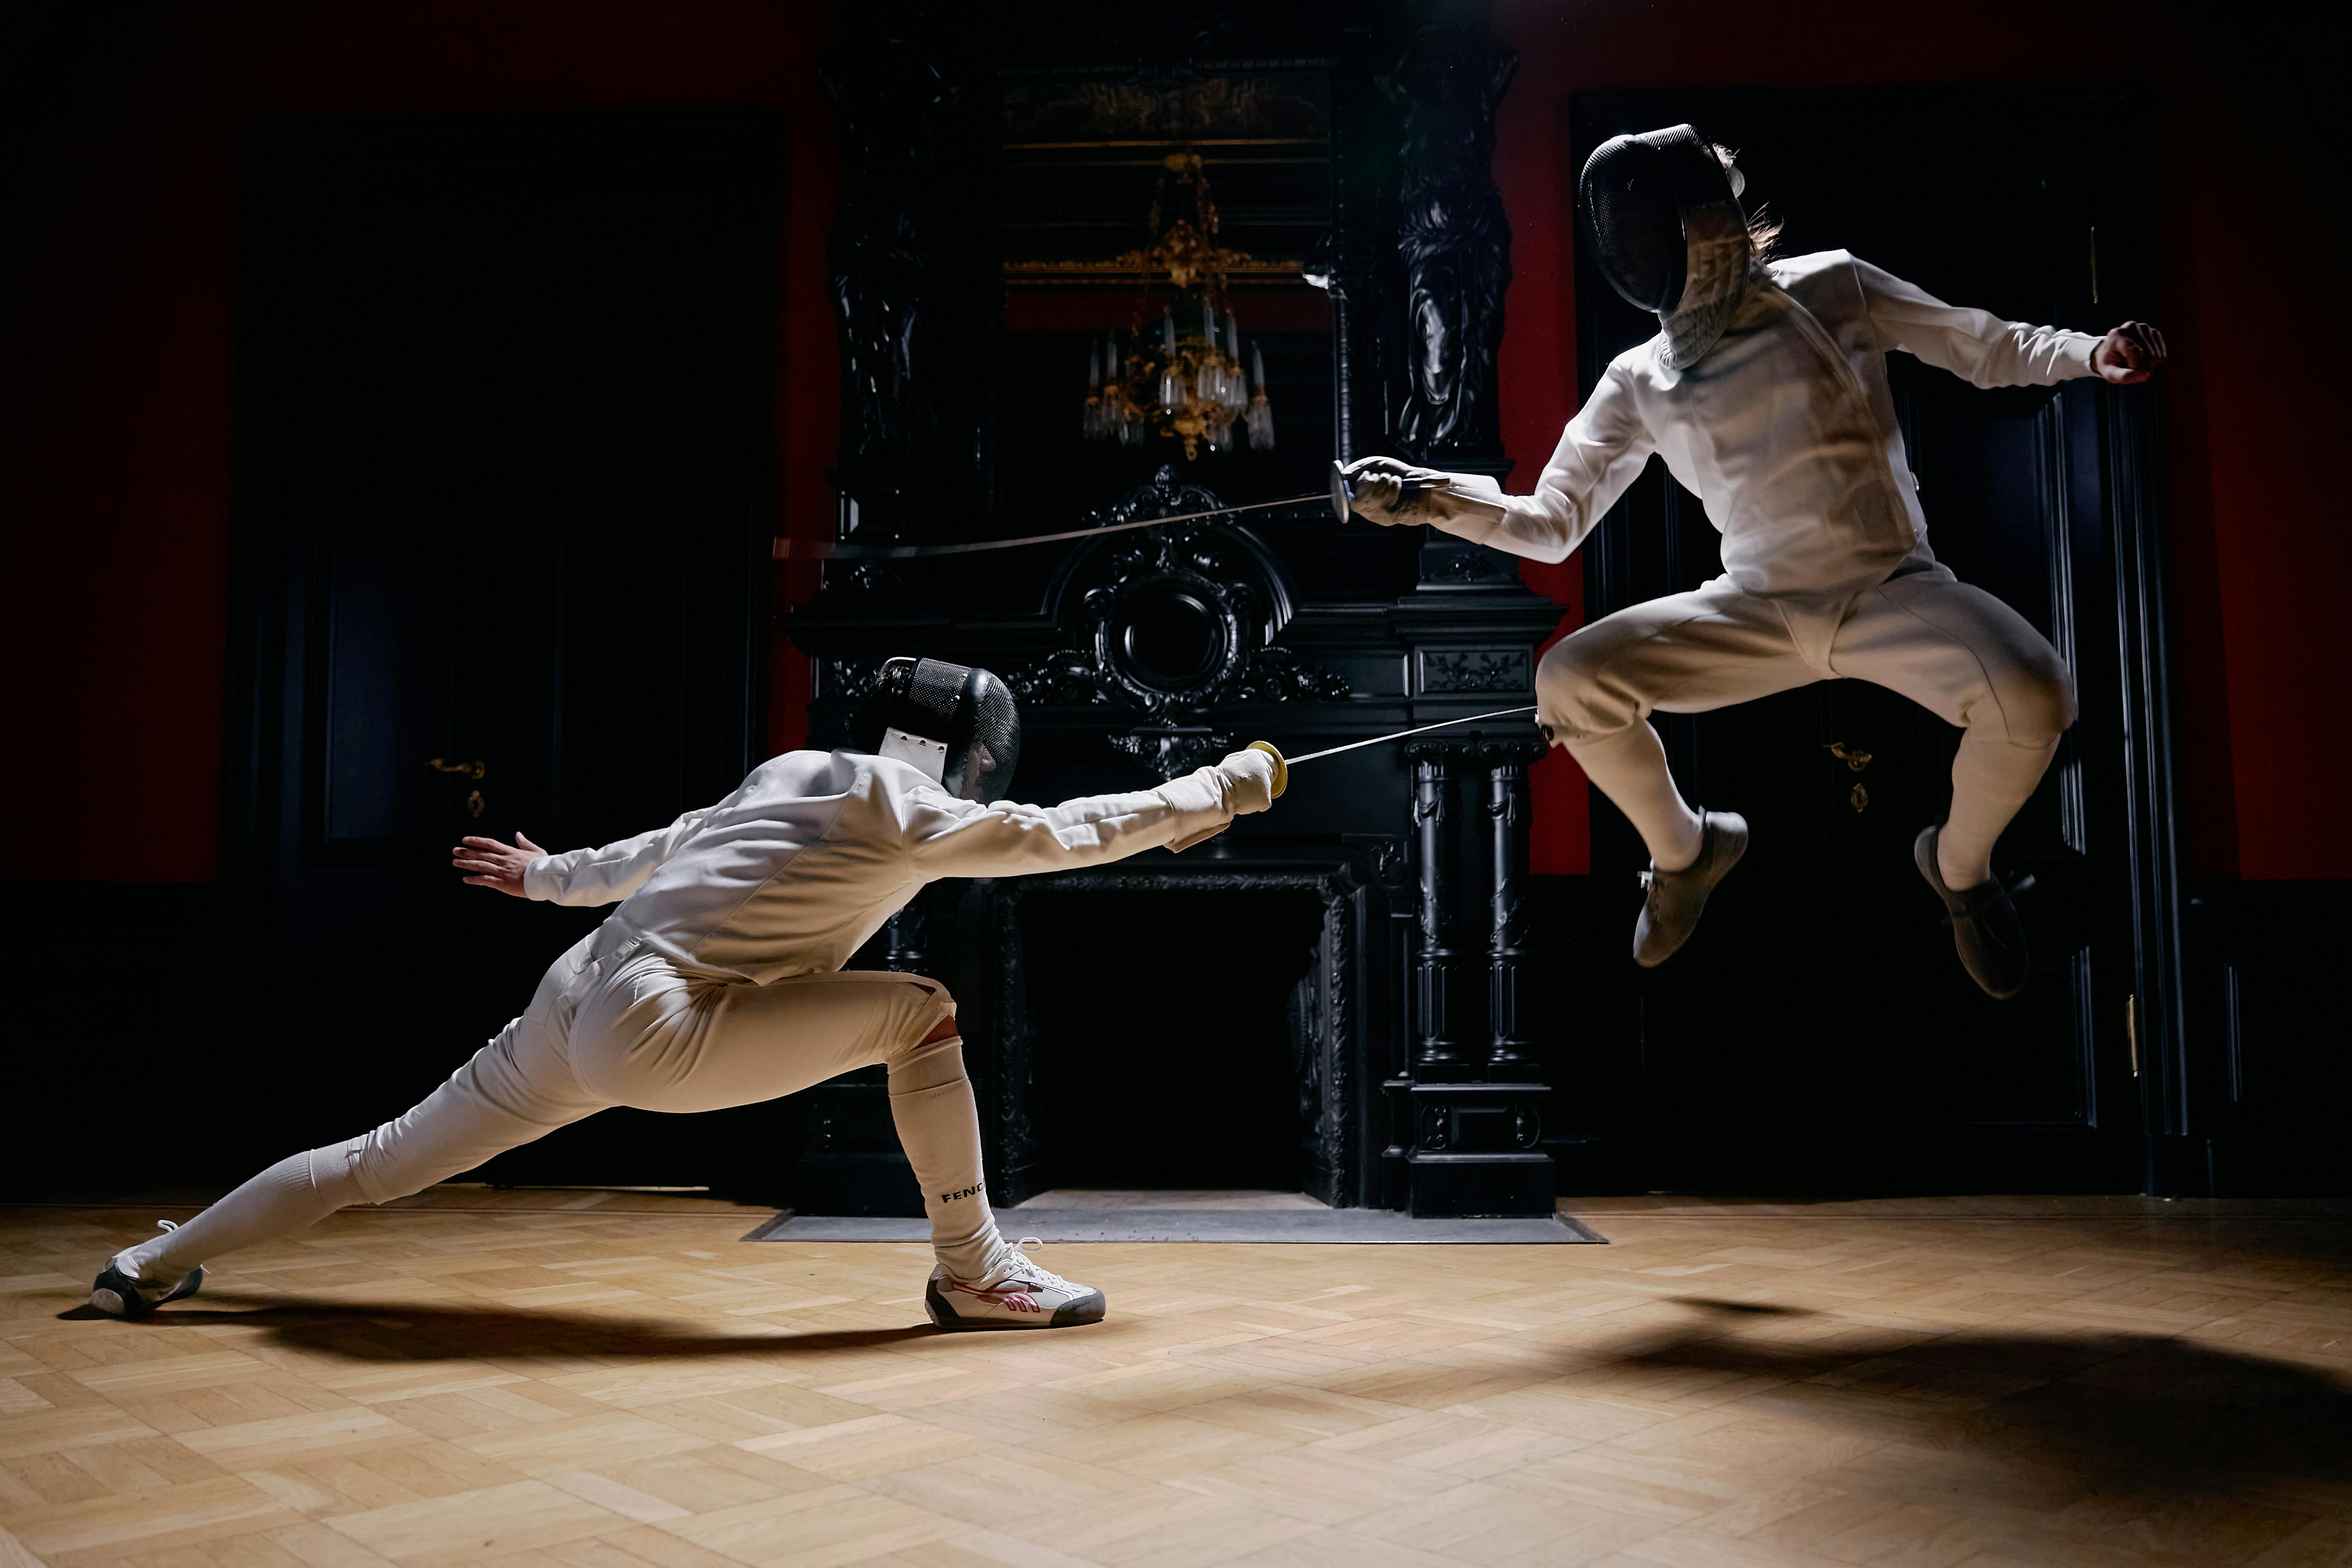 113424 Fencing Sport Photos and Premium High Res Pictures  Getty Images